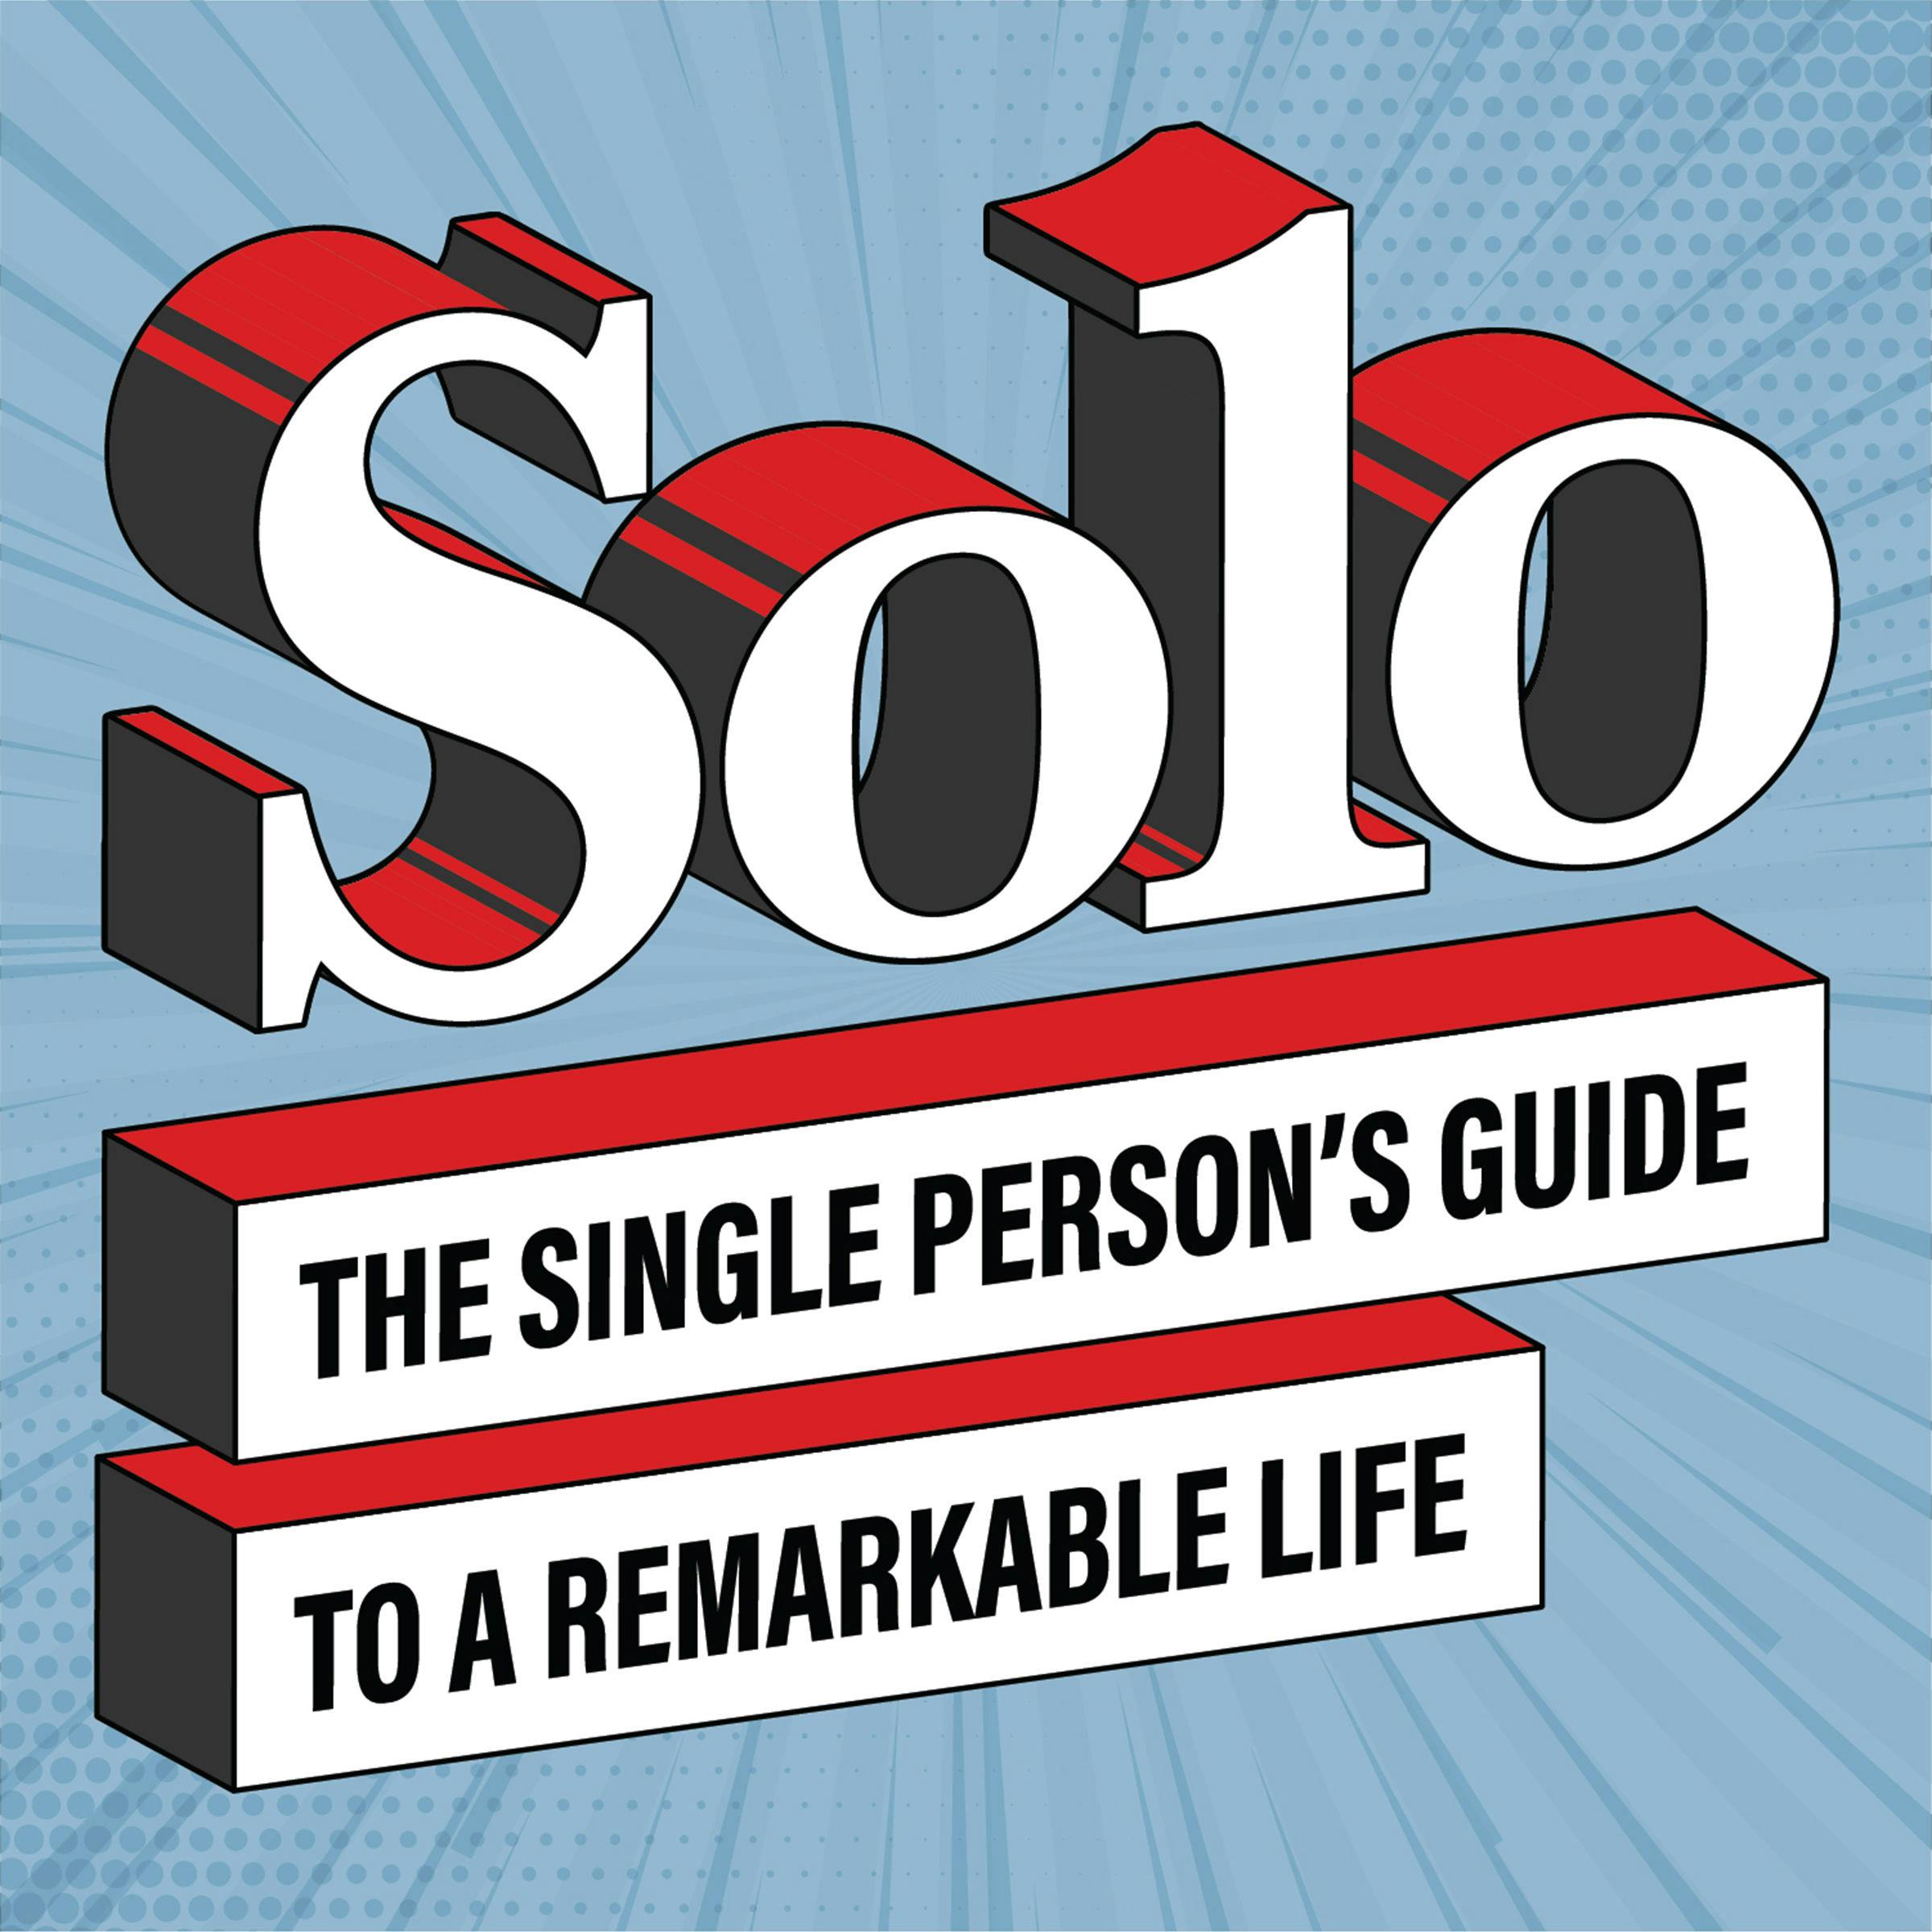 Solo: The Single Person’s Guide to a Remarkable Life